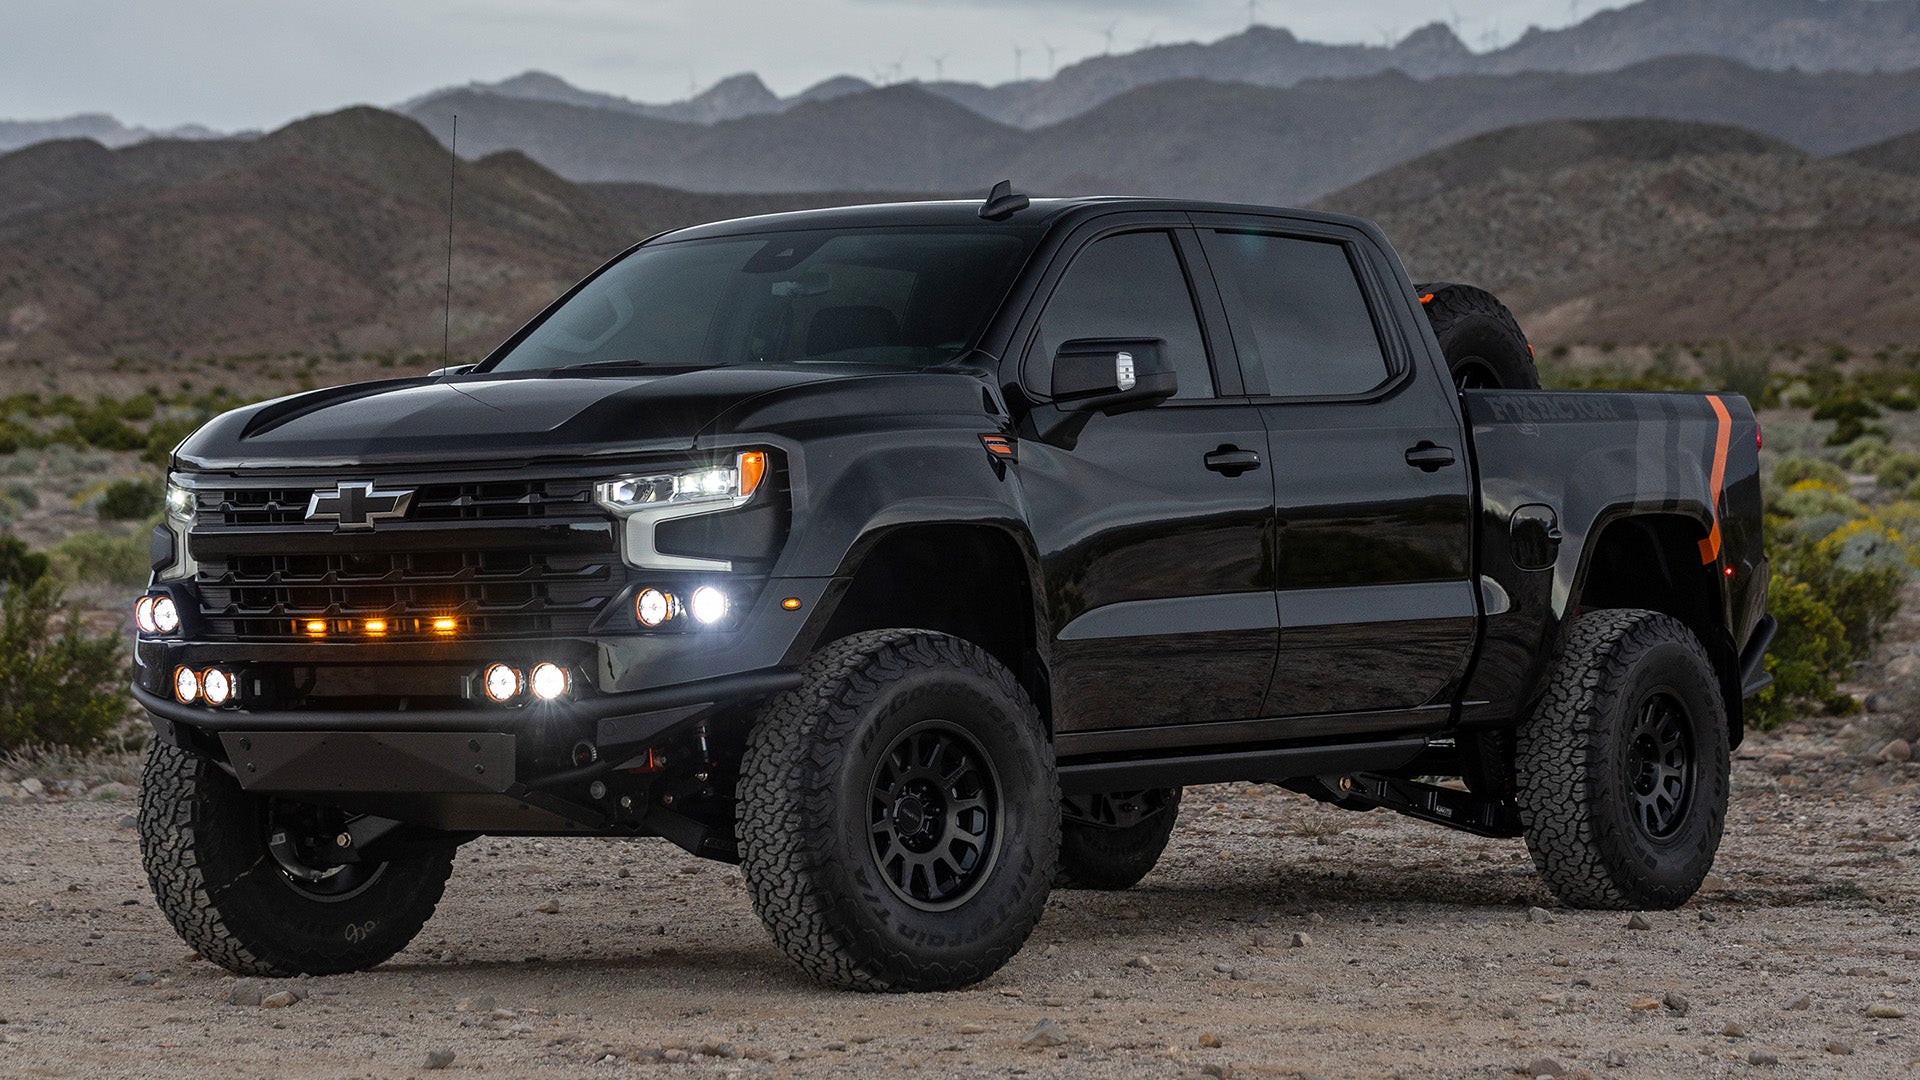 Fox Shocks is offering for sale the Skunkworks Silverado, featuring 700 horsepower and an adventurous suspension system.